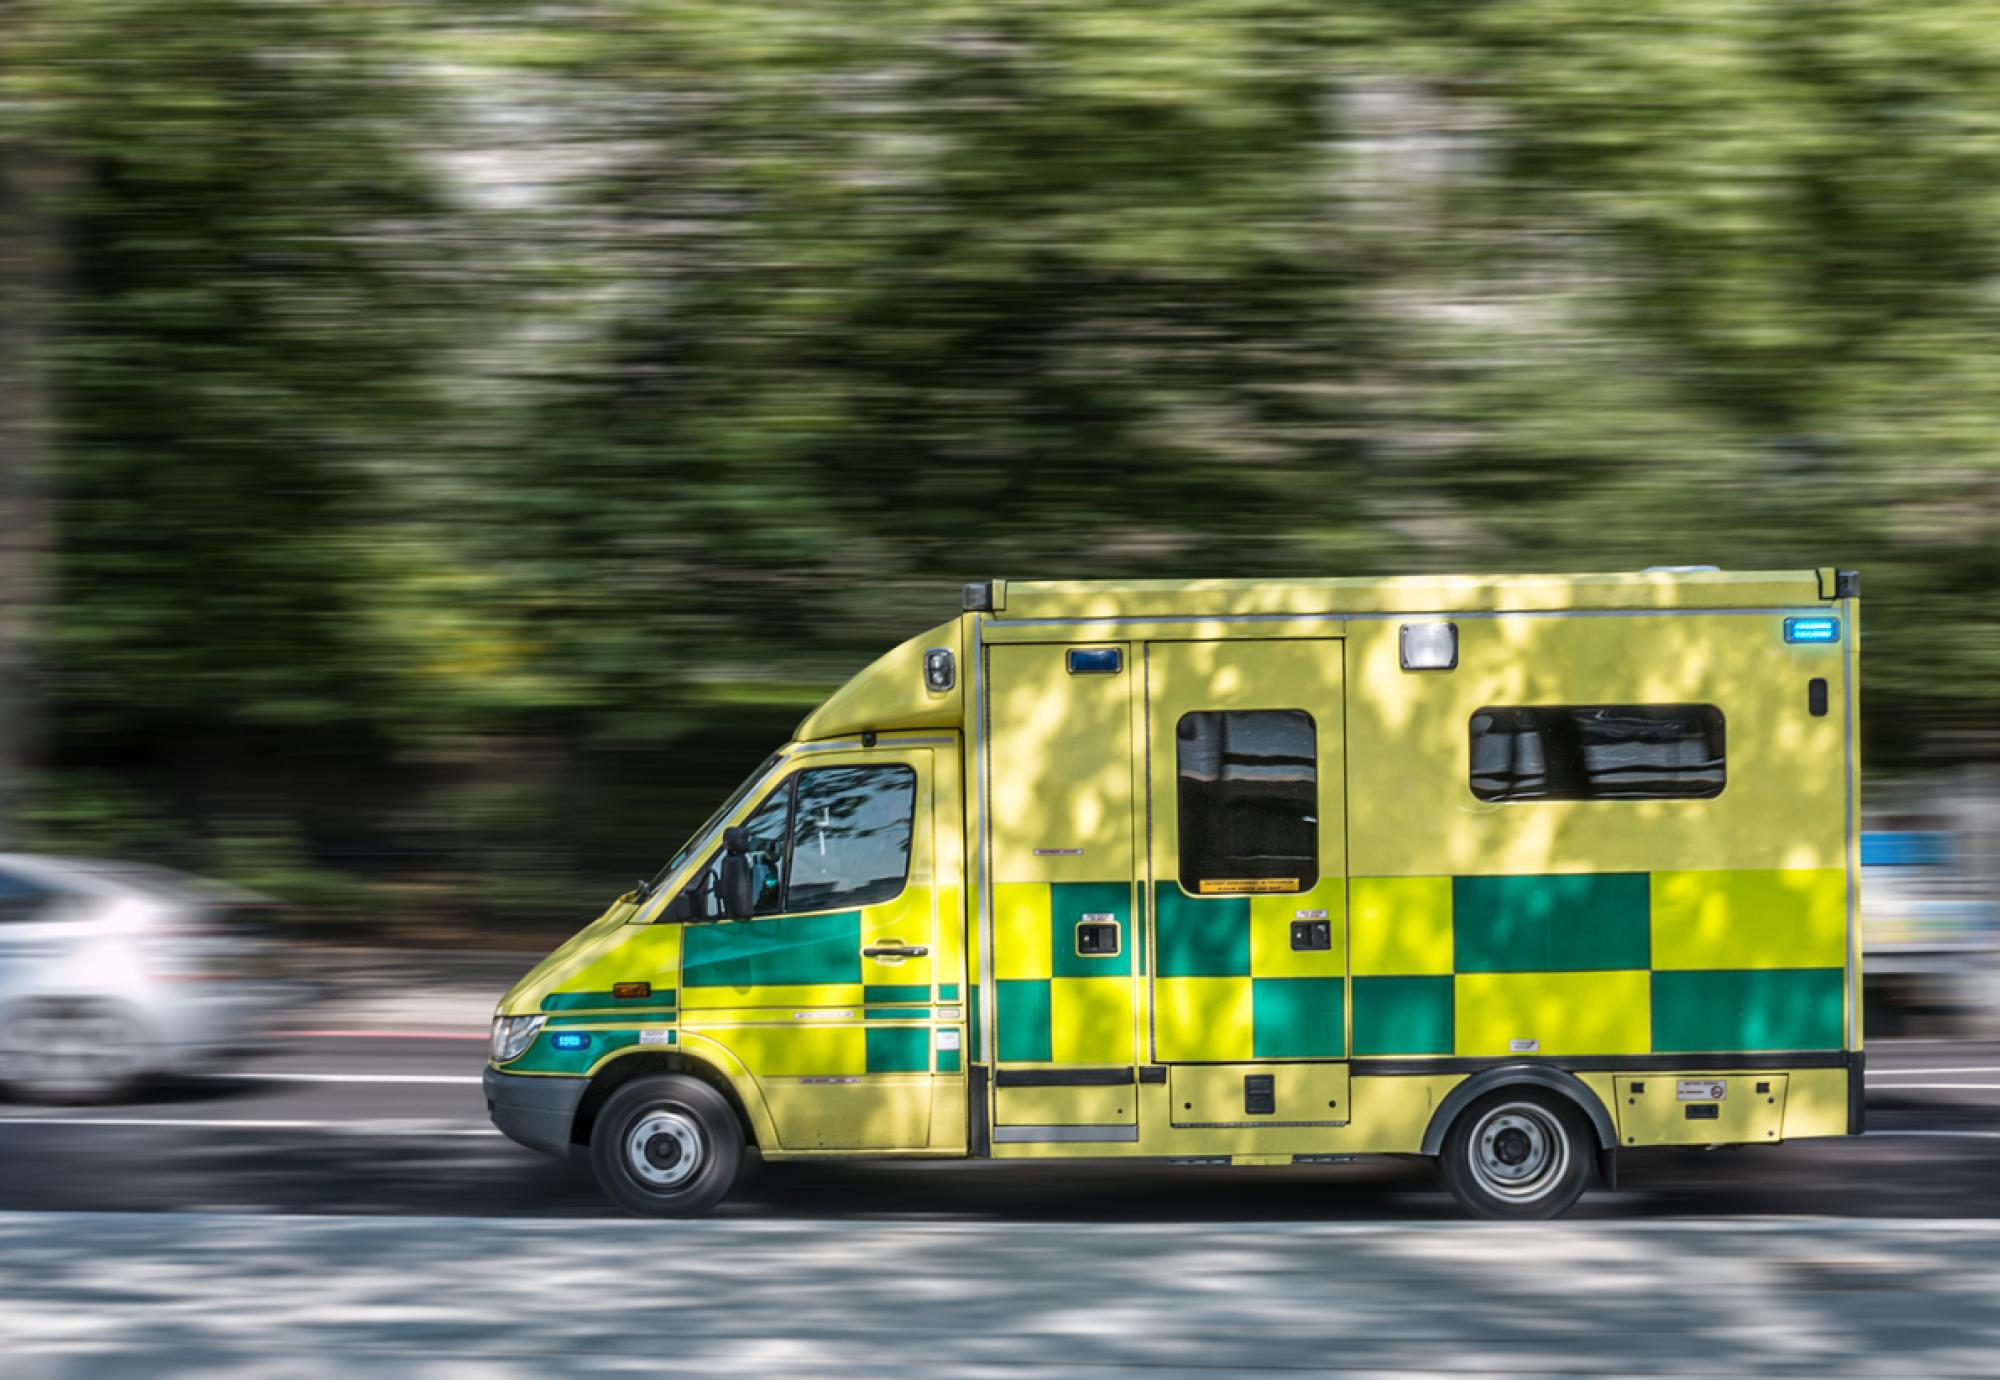 Image of an ambulance on the road depicting the NHS mobile liver cancer testing trucks